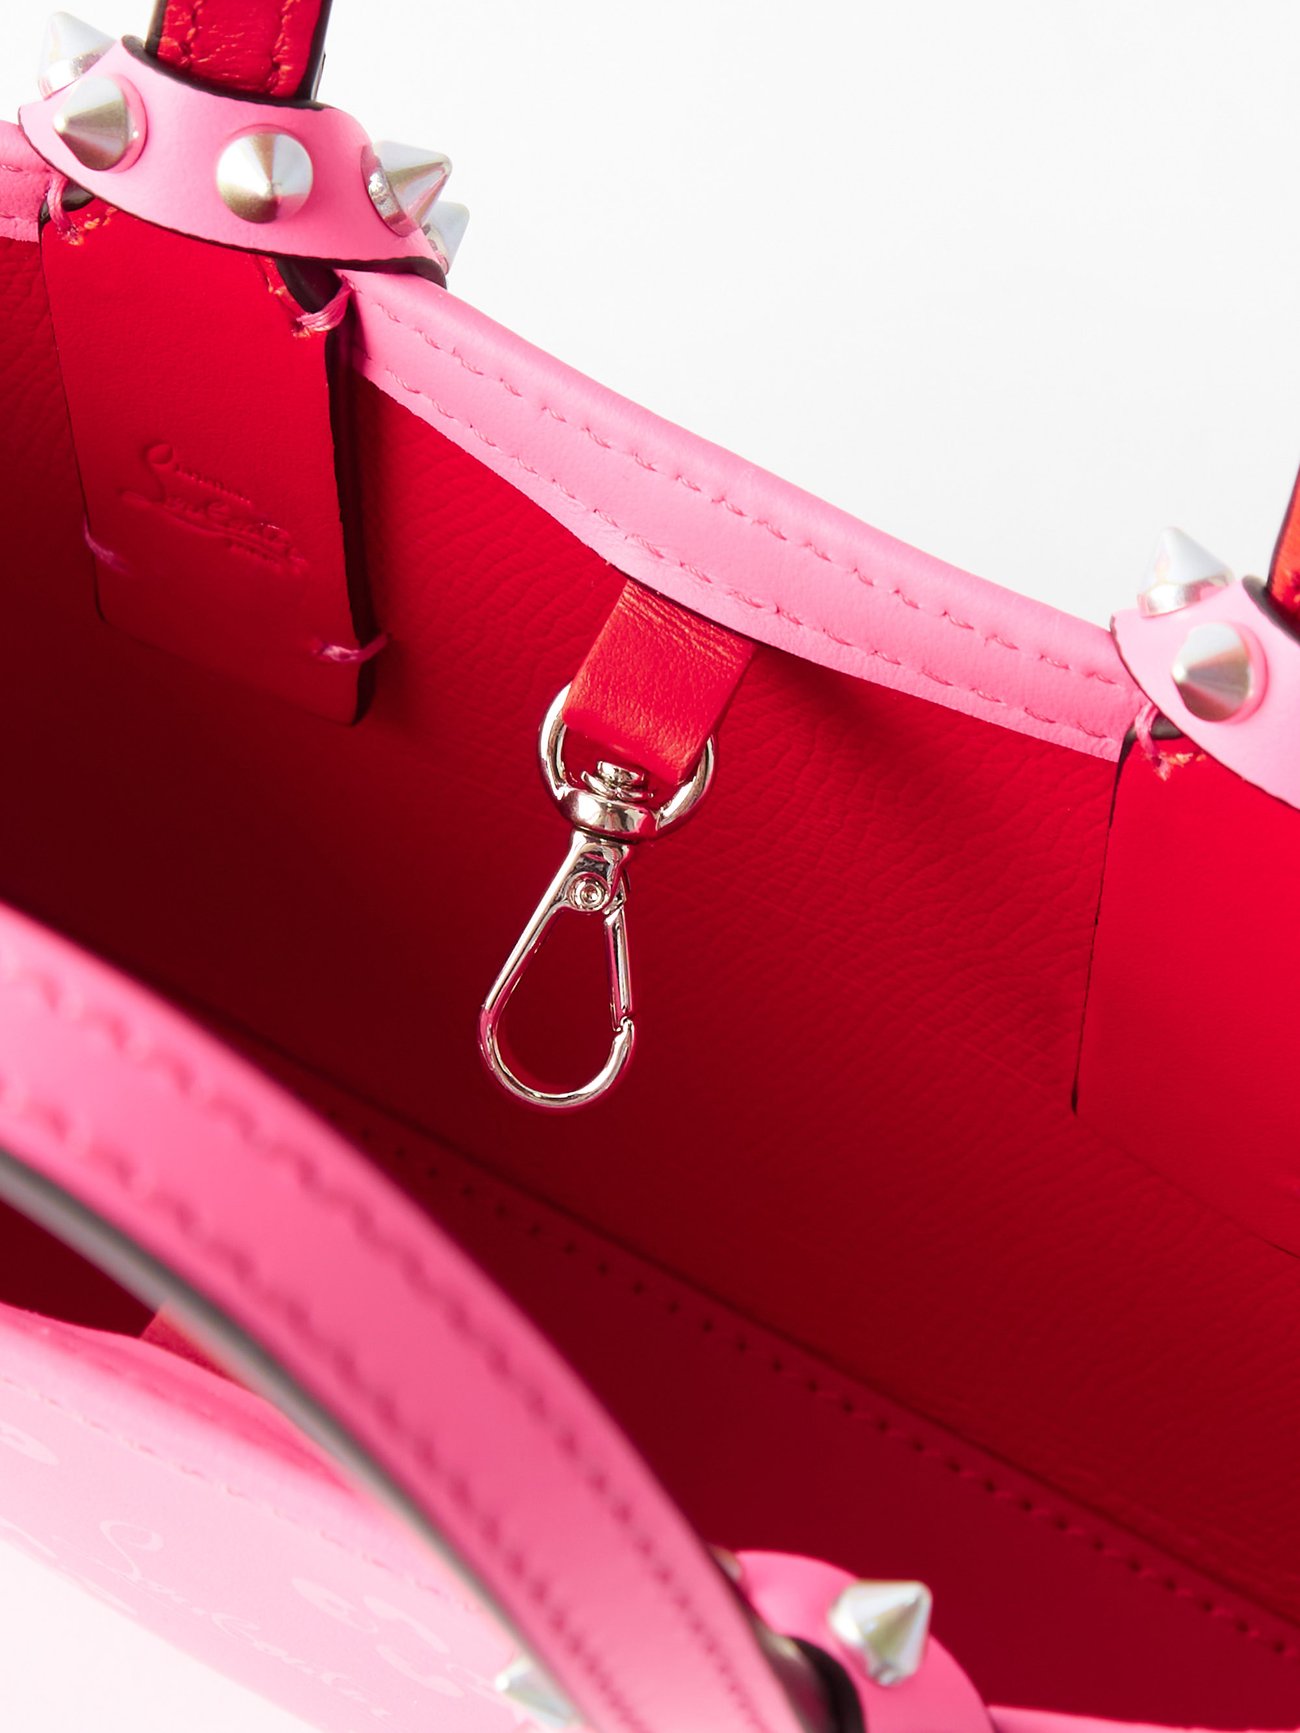 Christian Louboutin Cabata Mini Spike Colorblock Clear Tote Bag in Pink